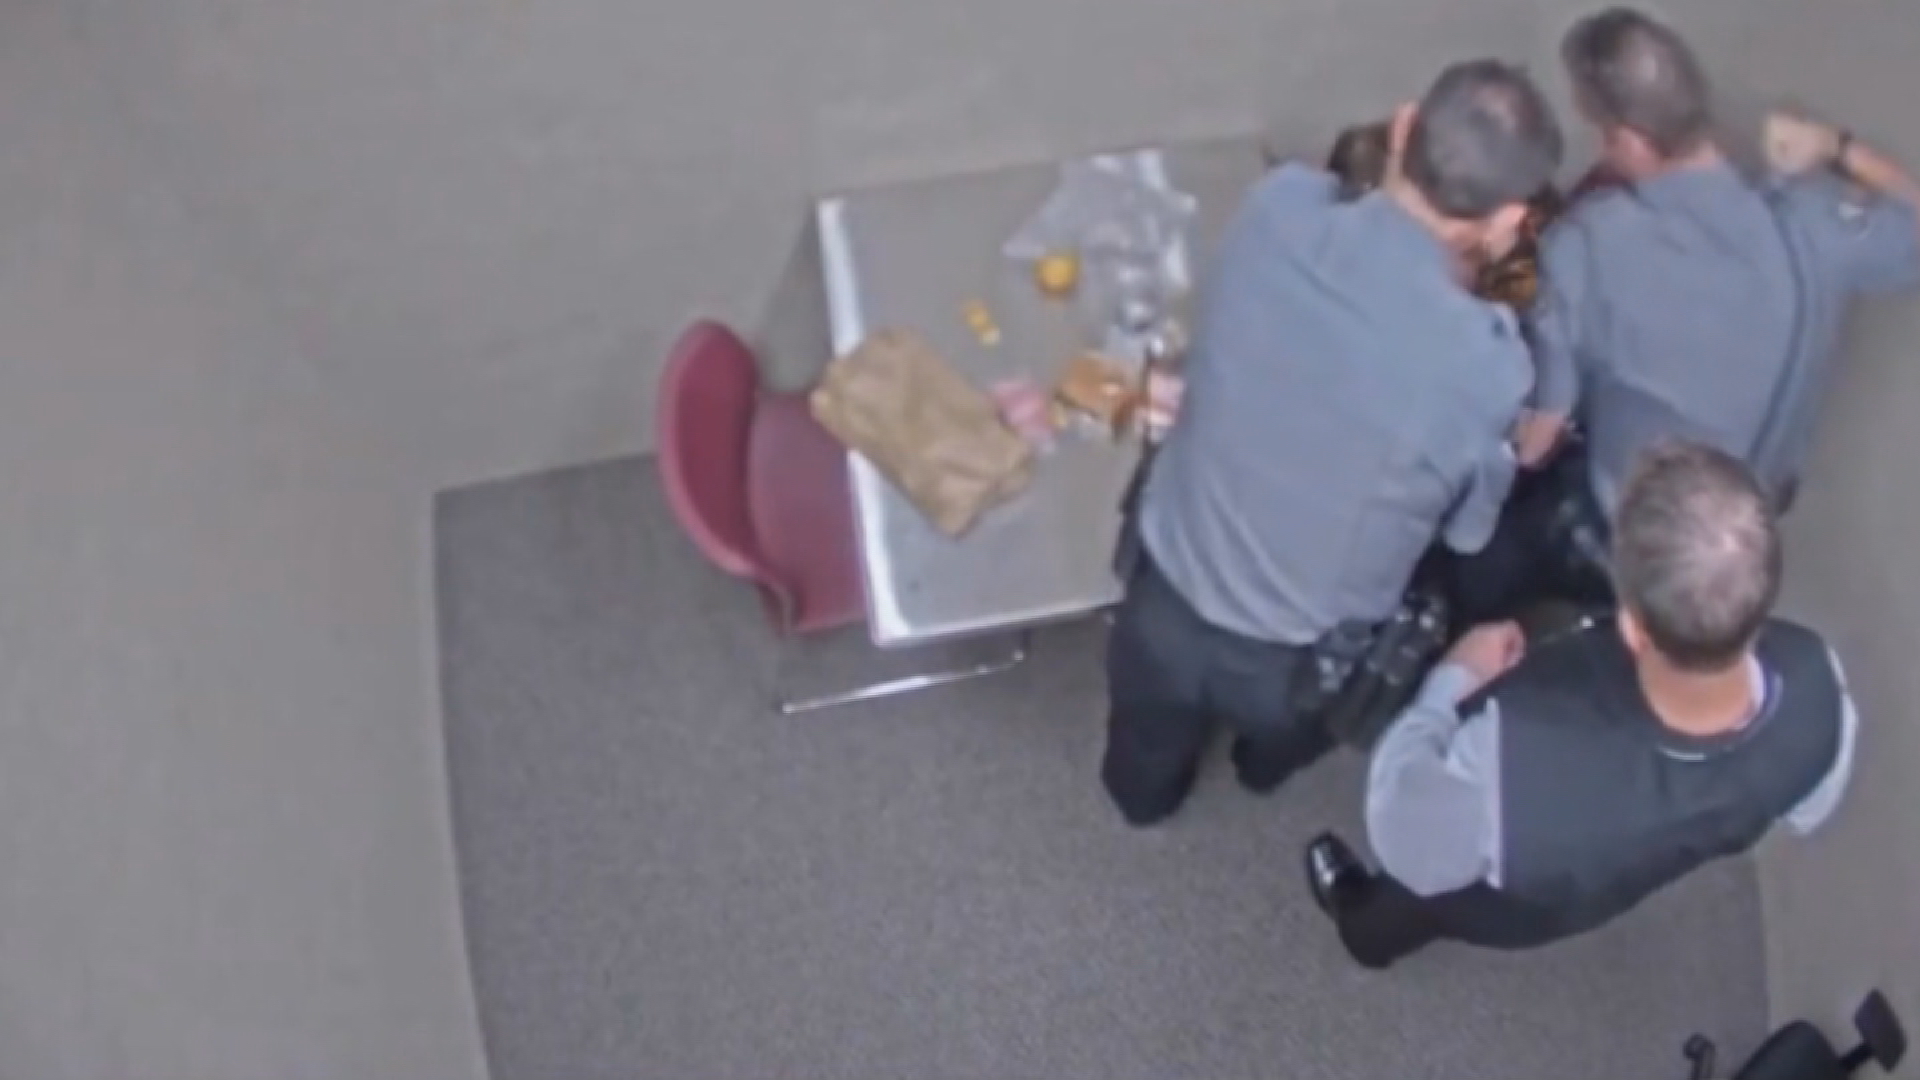 Three Weld County Sheriff's Deputies have been relieved of duty after one of them was caught on camera punching a suspect.